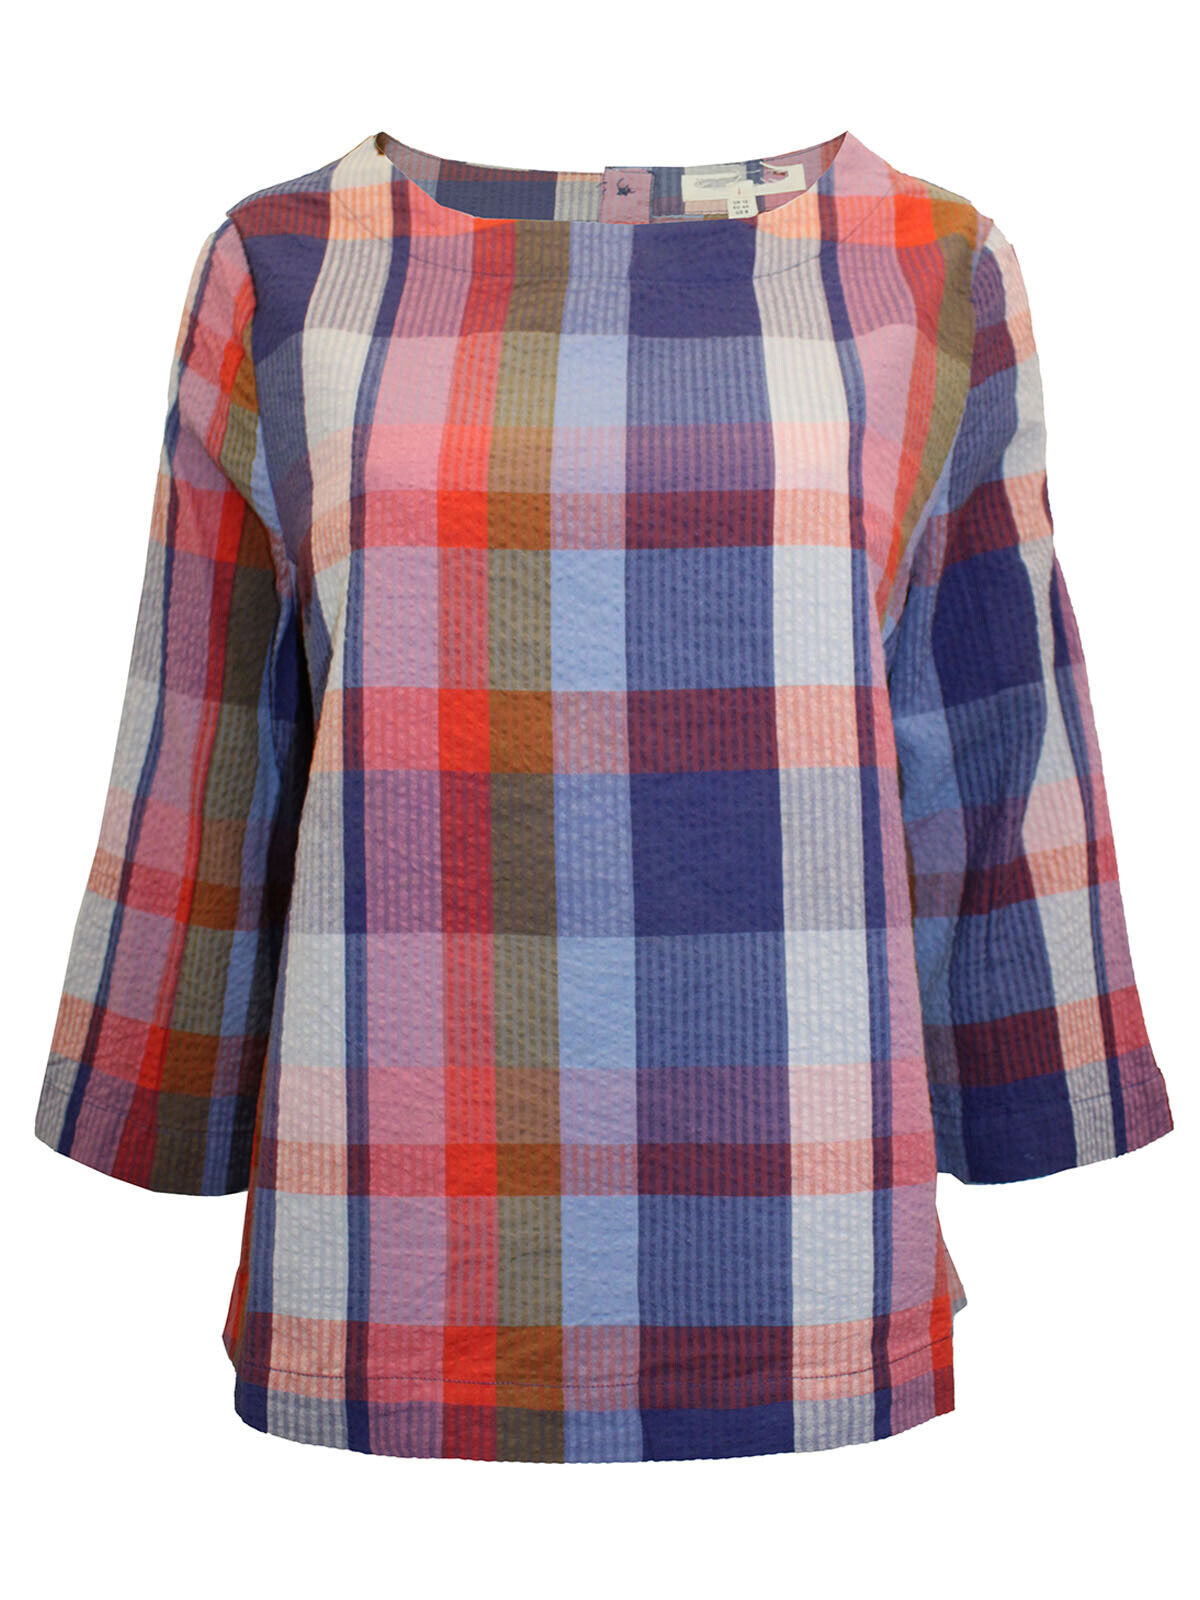 EX Seasalt Pure Cotton Checked Stipple Shore Top in Sizes 12, 14, 24 RRP £52.95